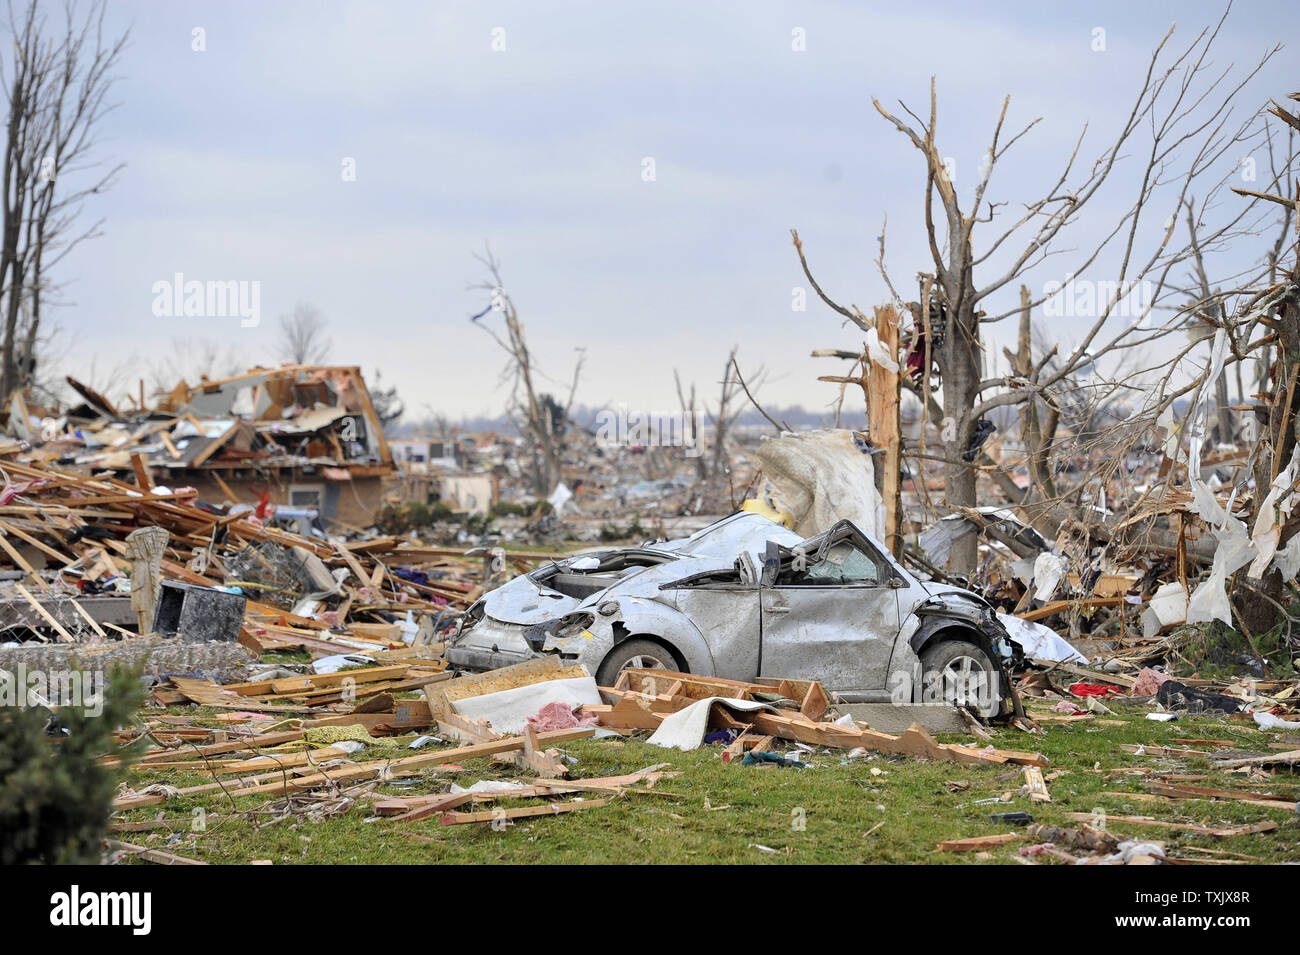 A car sits in the middle of a devastated subdivision in Washington, Illinois on November 18, 2013. Six people died and hundreds of homes were destroyed in Illinois as 81 tornadoes were sighted on November 17 throughout 12 midwest states including the EF4 tornado that struck Washington, Illinois.     UPI/Brian Kersey Stock Photo